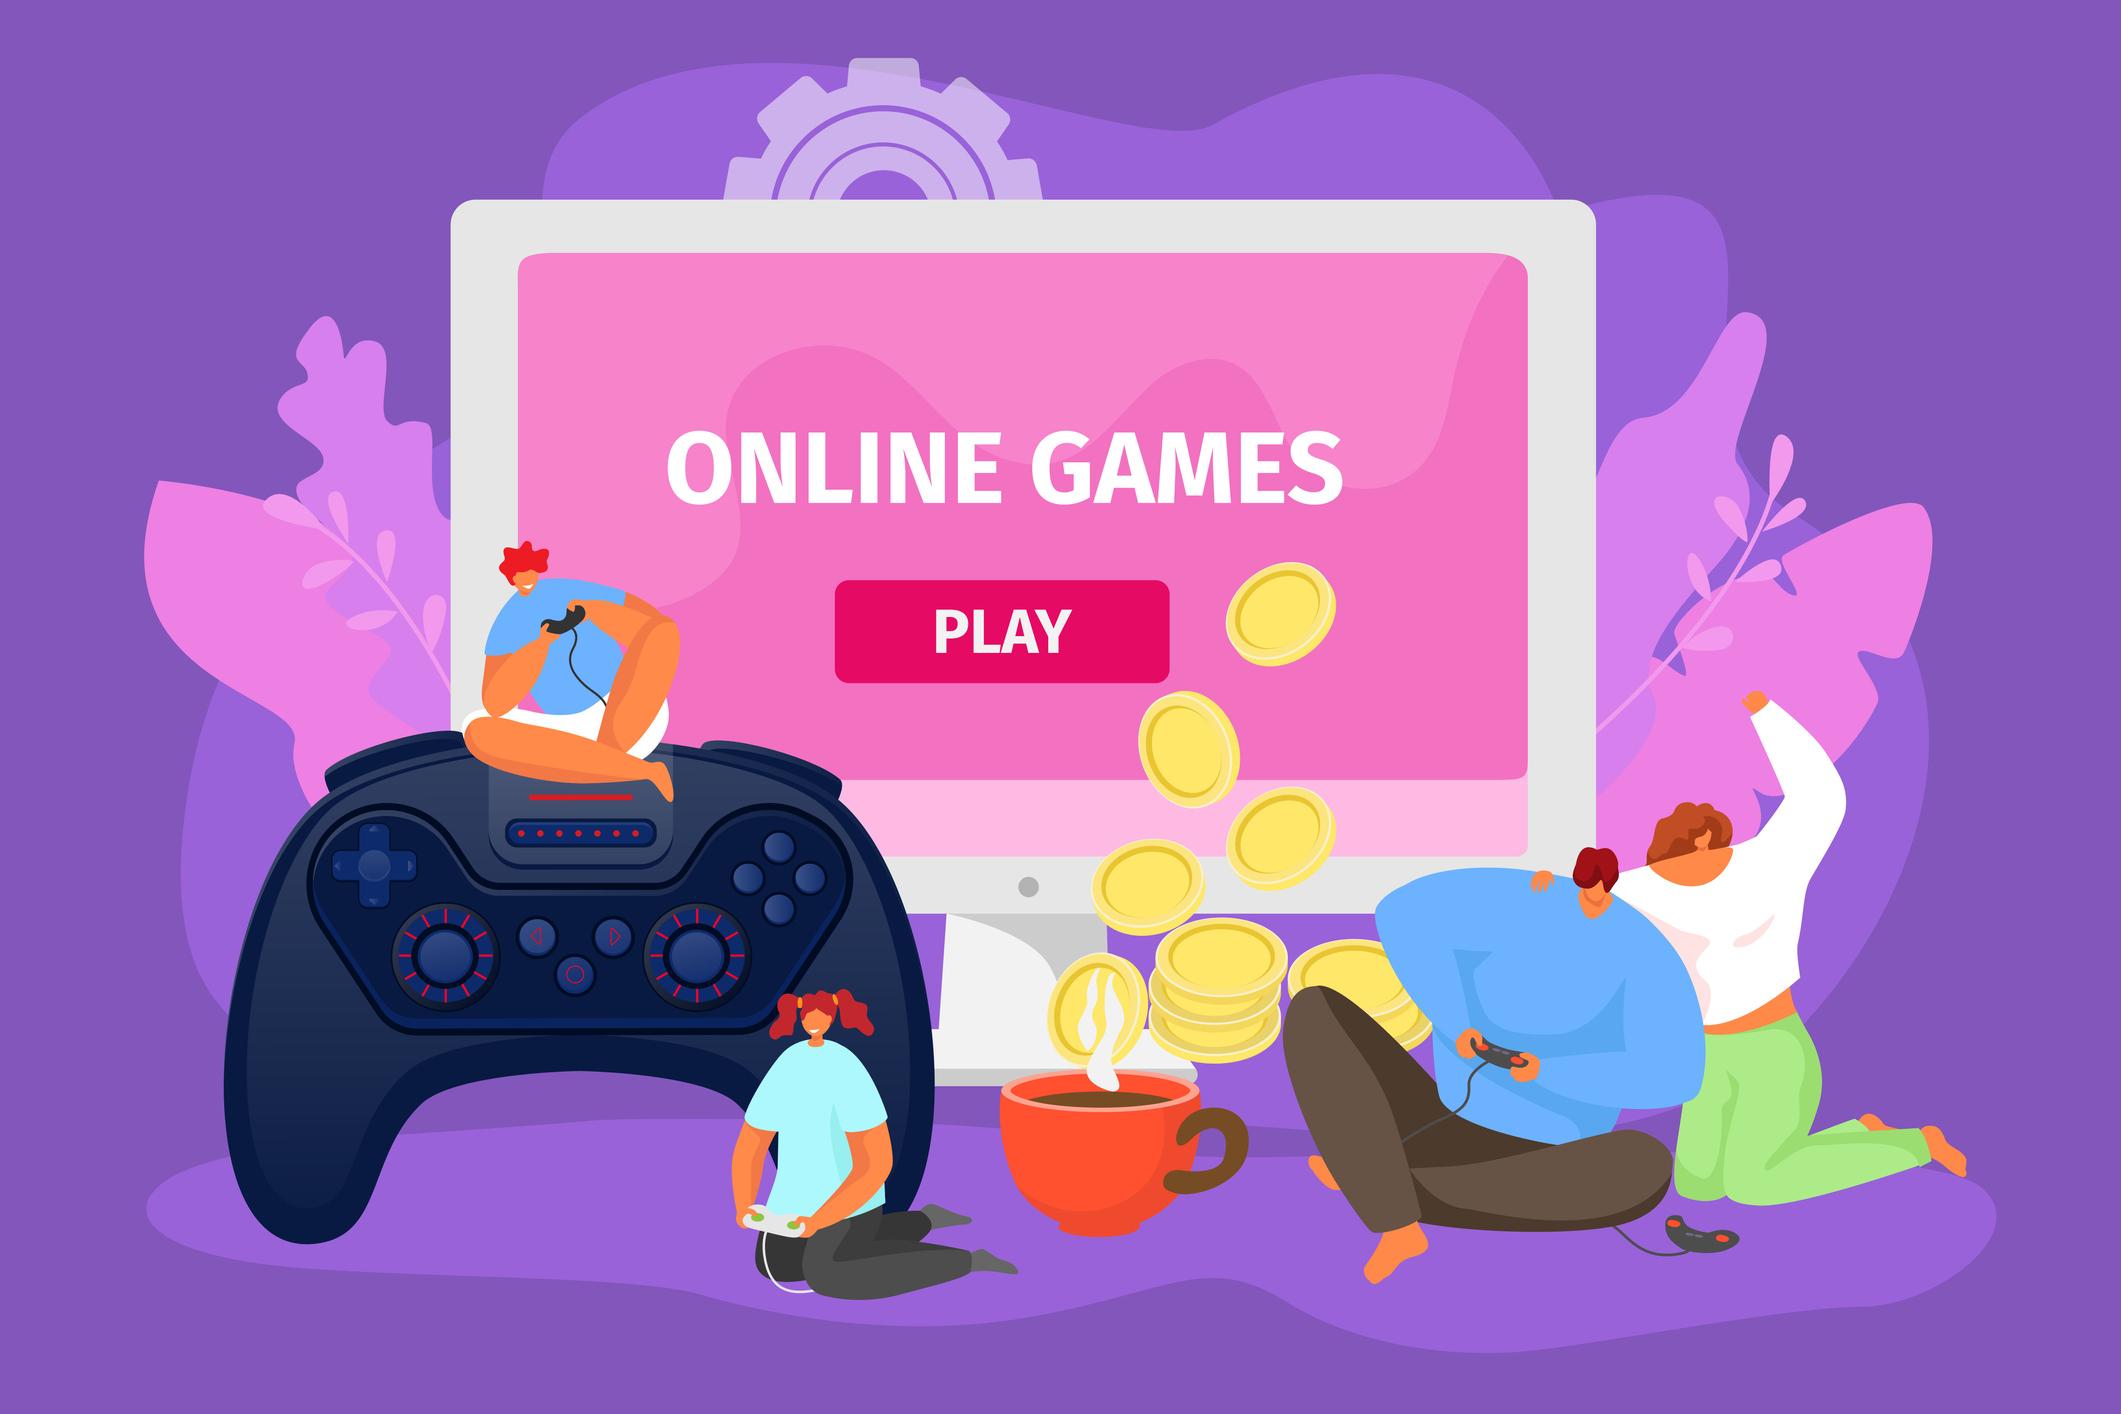  Online games concept, vector illustration. Play at flat computer and console, creative background design. People family character in internet online technology, abstract digital gaming with joystick. 